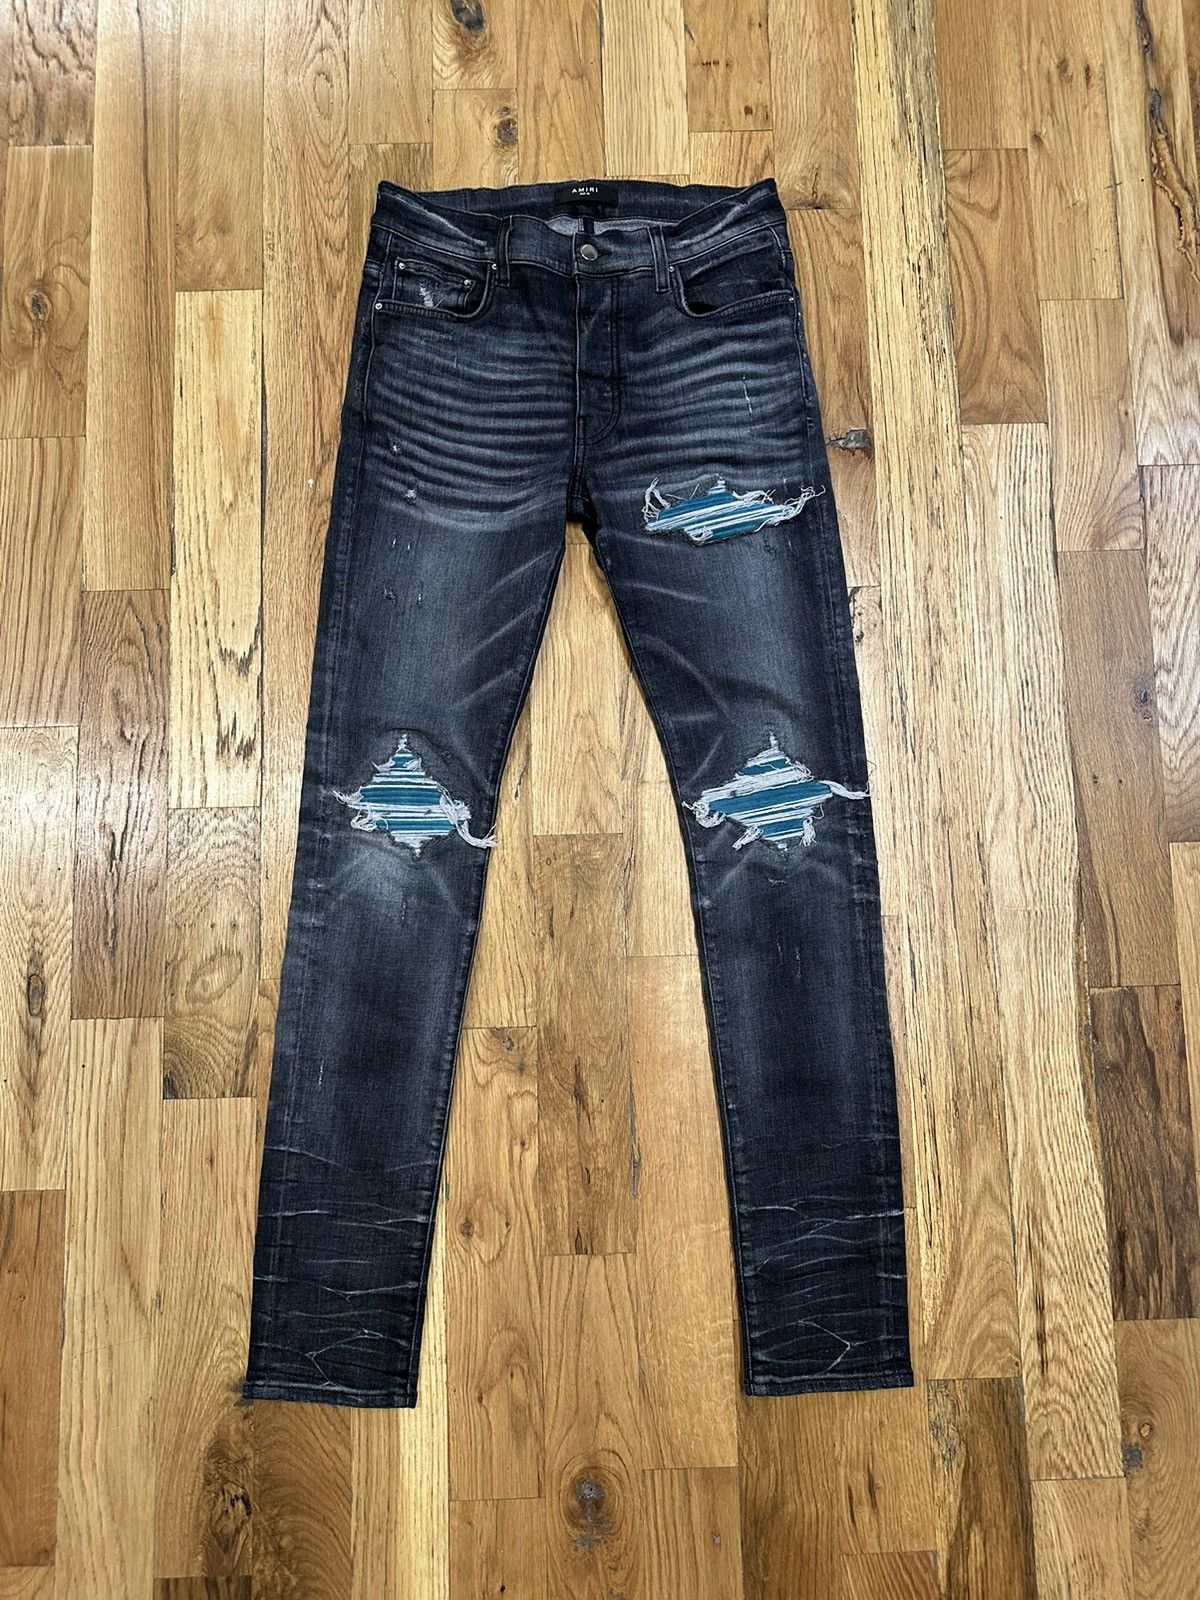 Pre-owned Amiri Mx1 Teal Suede Gray Denim Jeans Size 32 In Grey